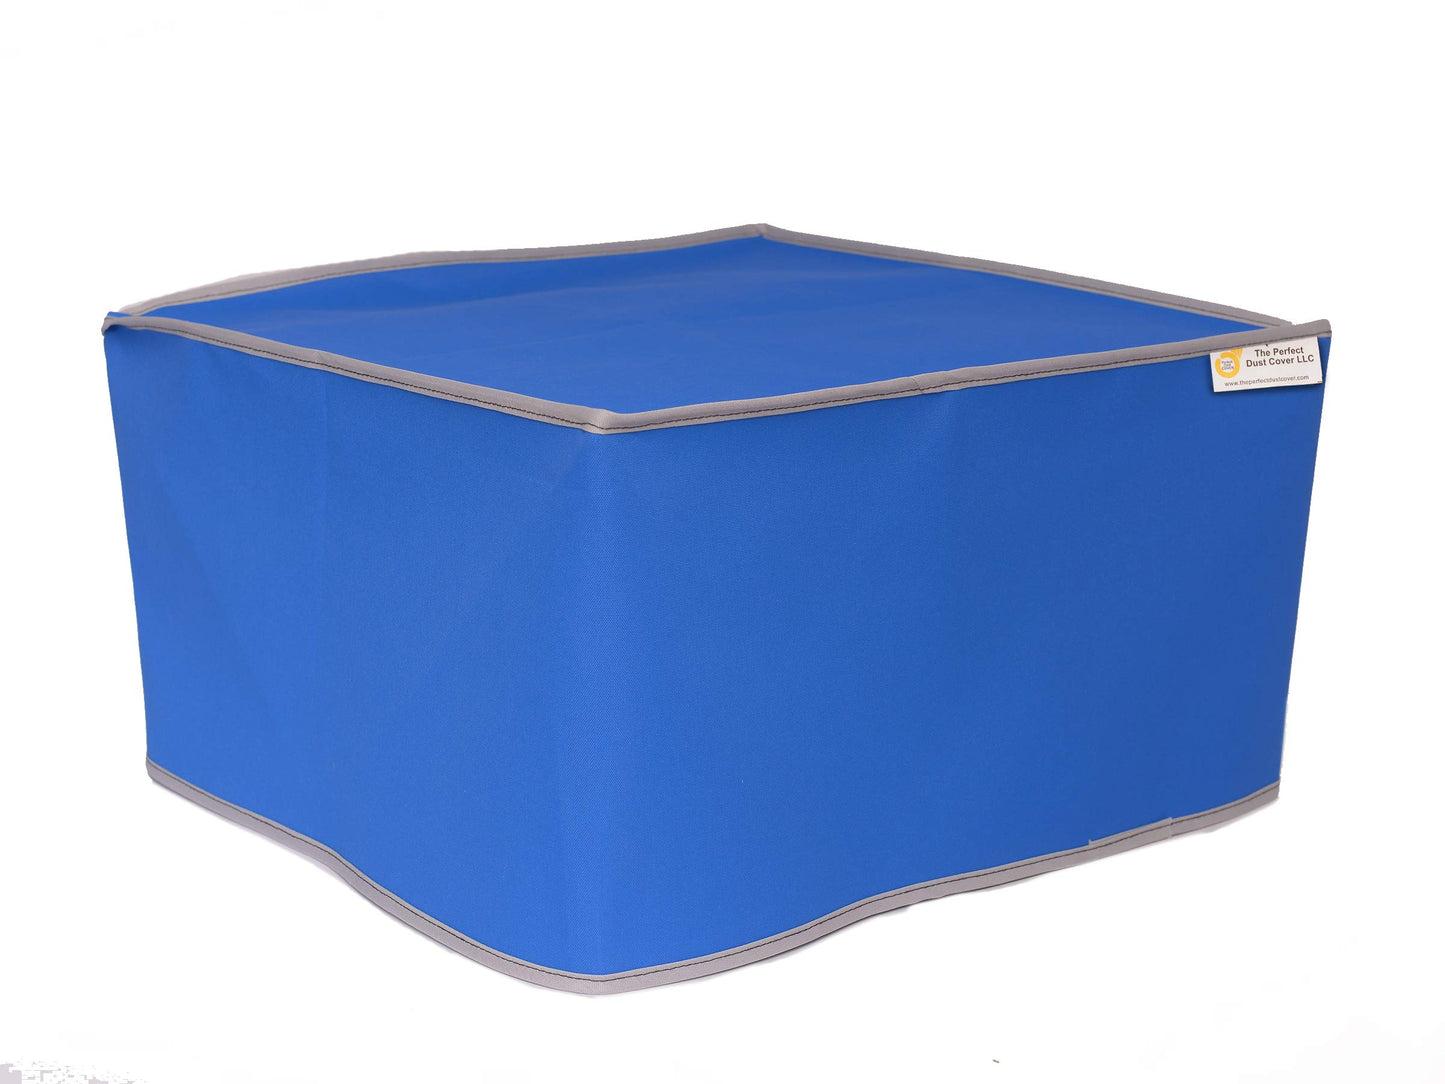 The Perfect Dust Cover, Royal Blue Nylon Short Cover for Epson SureColor T5475 36'' Wide Format Printer, Anti Static Waterproof Dimensions 55''W x 28''D x 19''H by The Perfect Dust Cover LLC